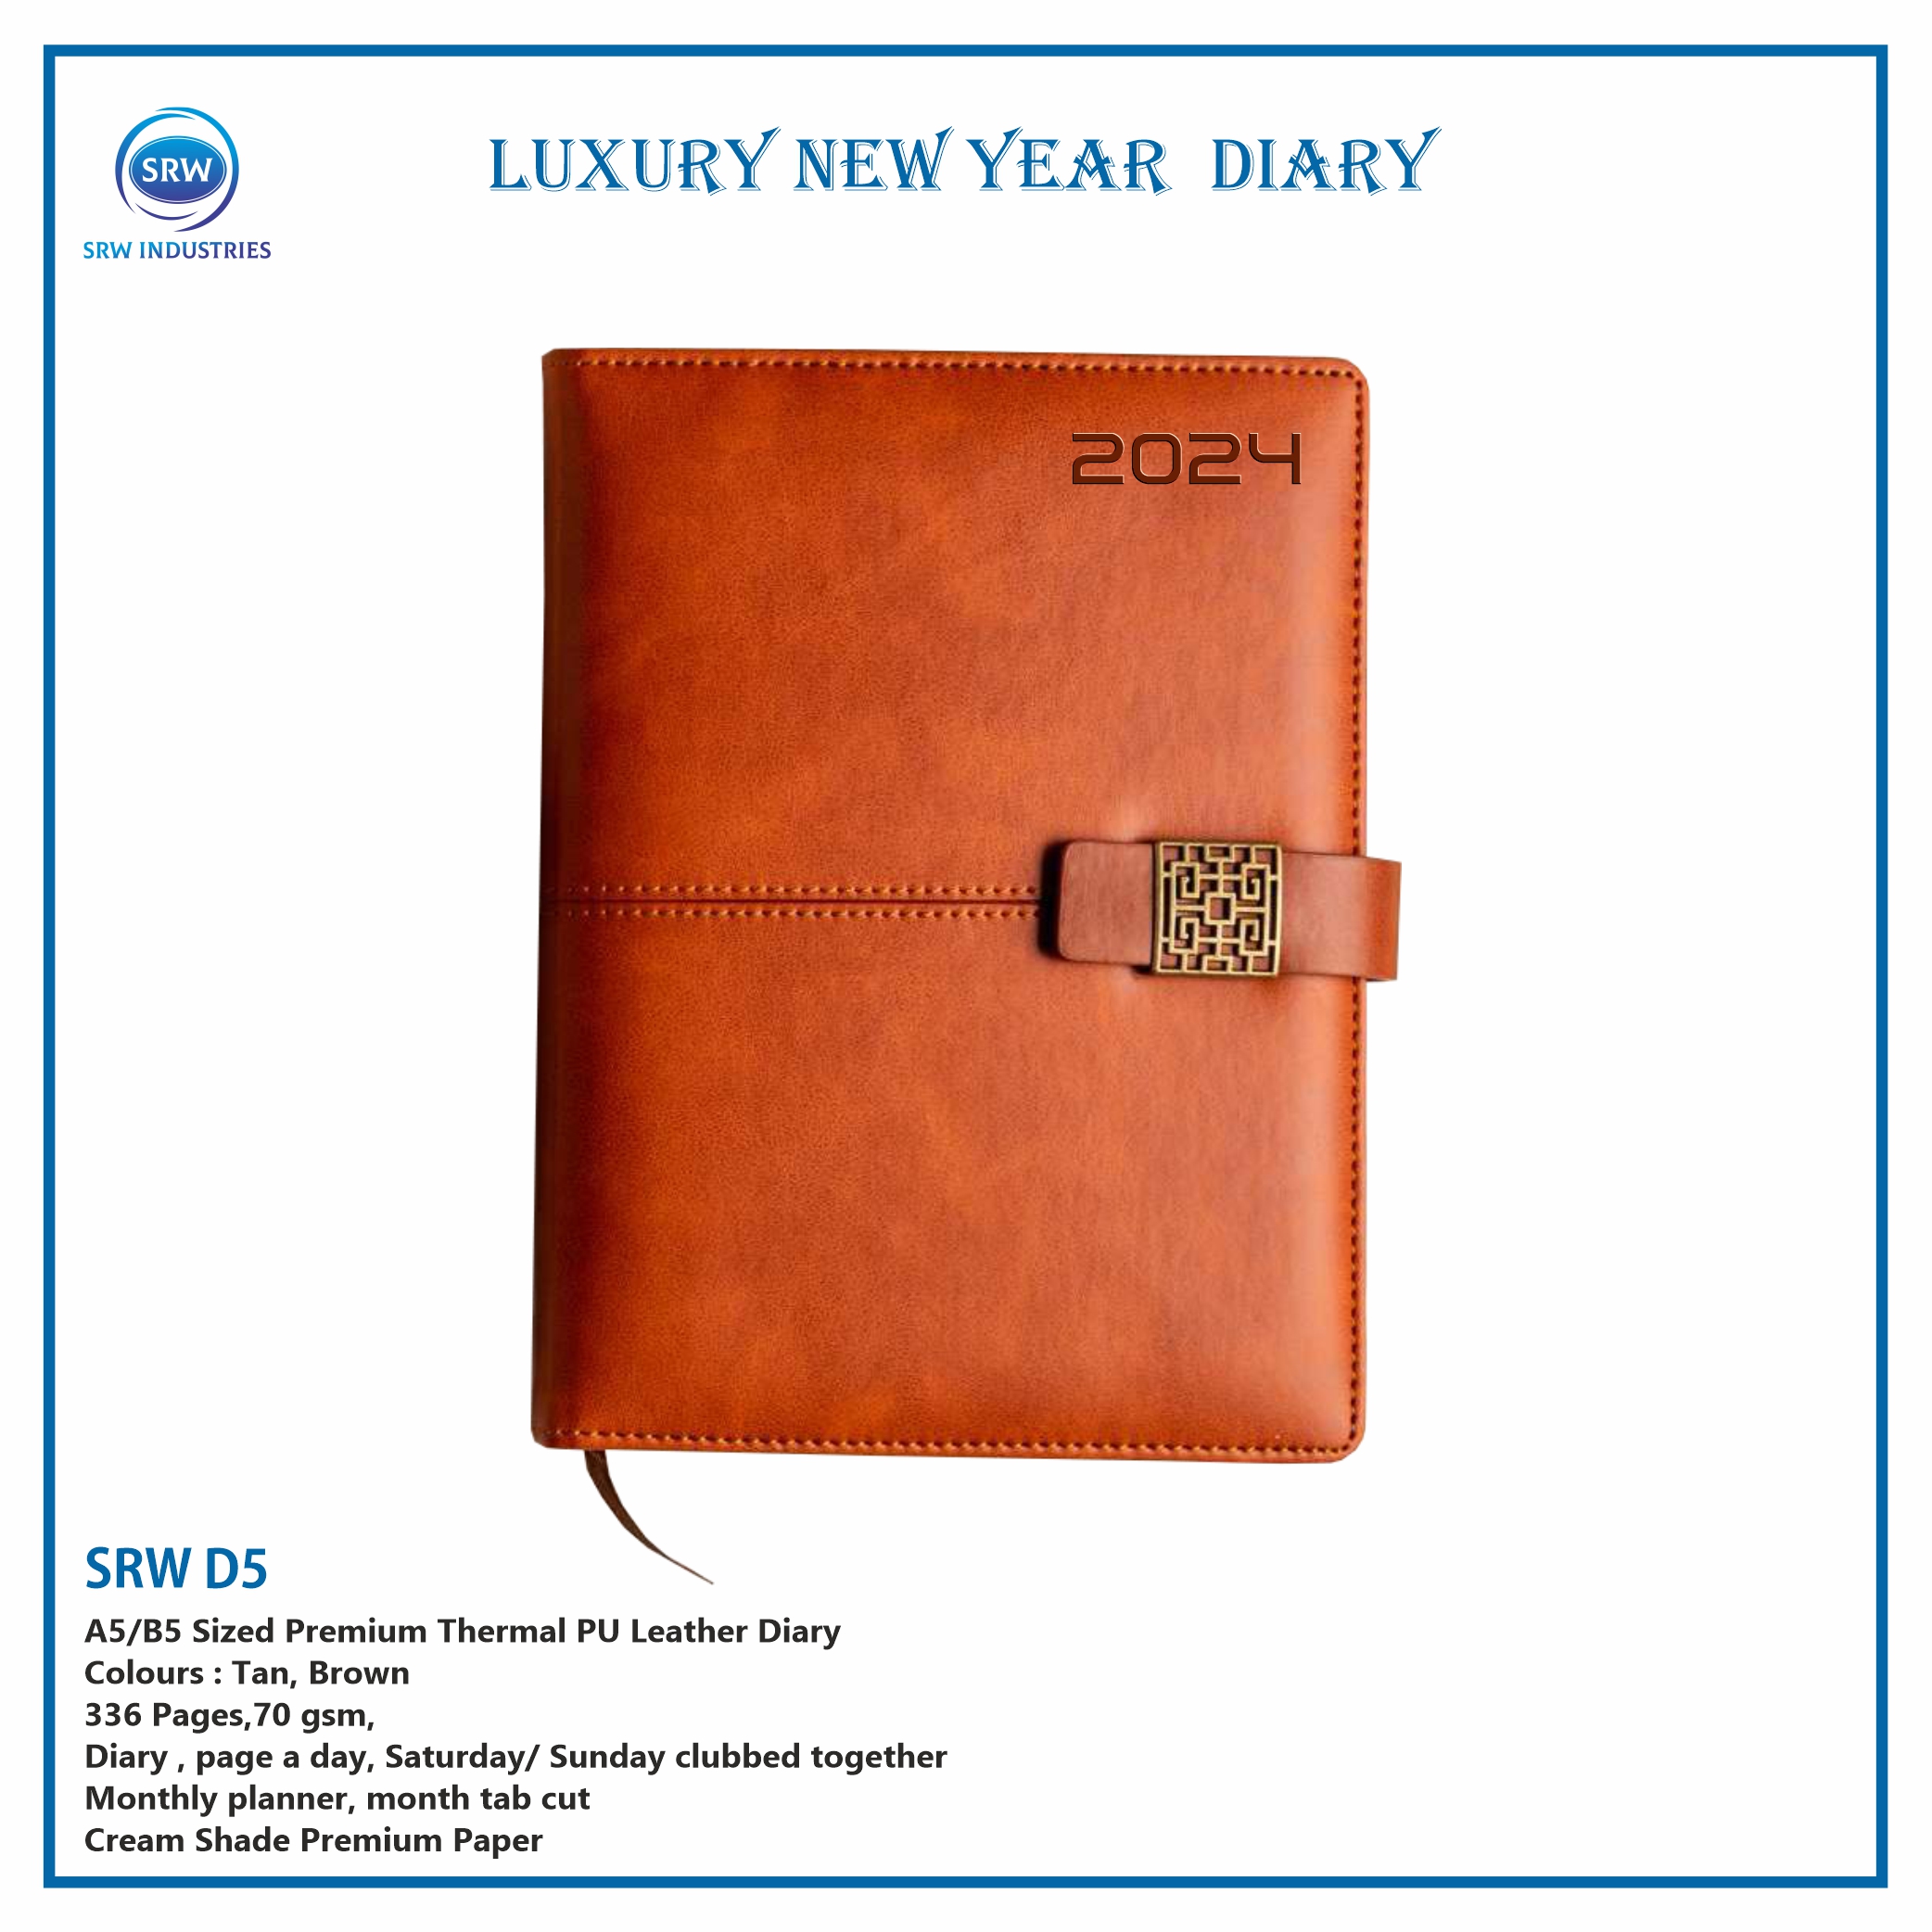 Luxury New Year Diary Manufacturers in Pune